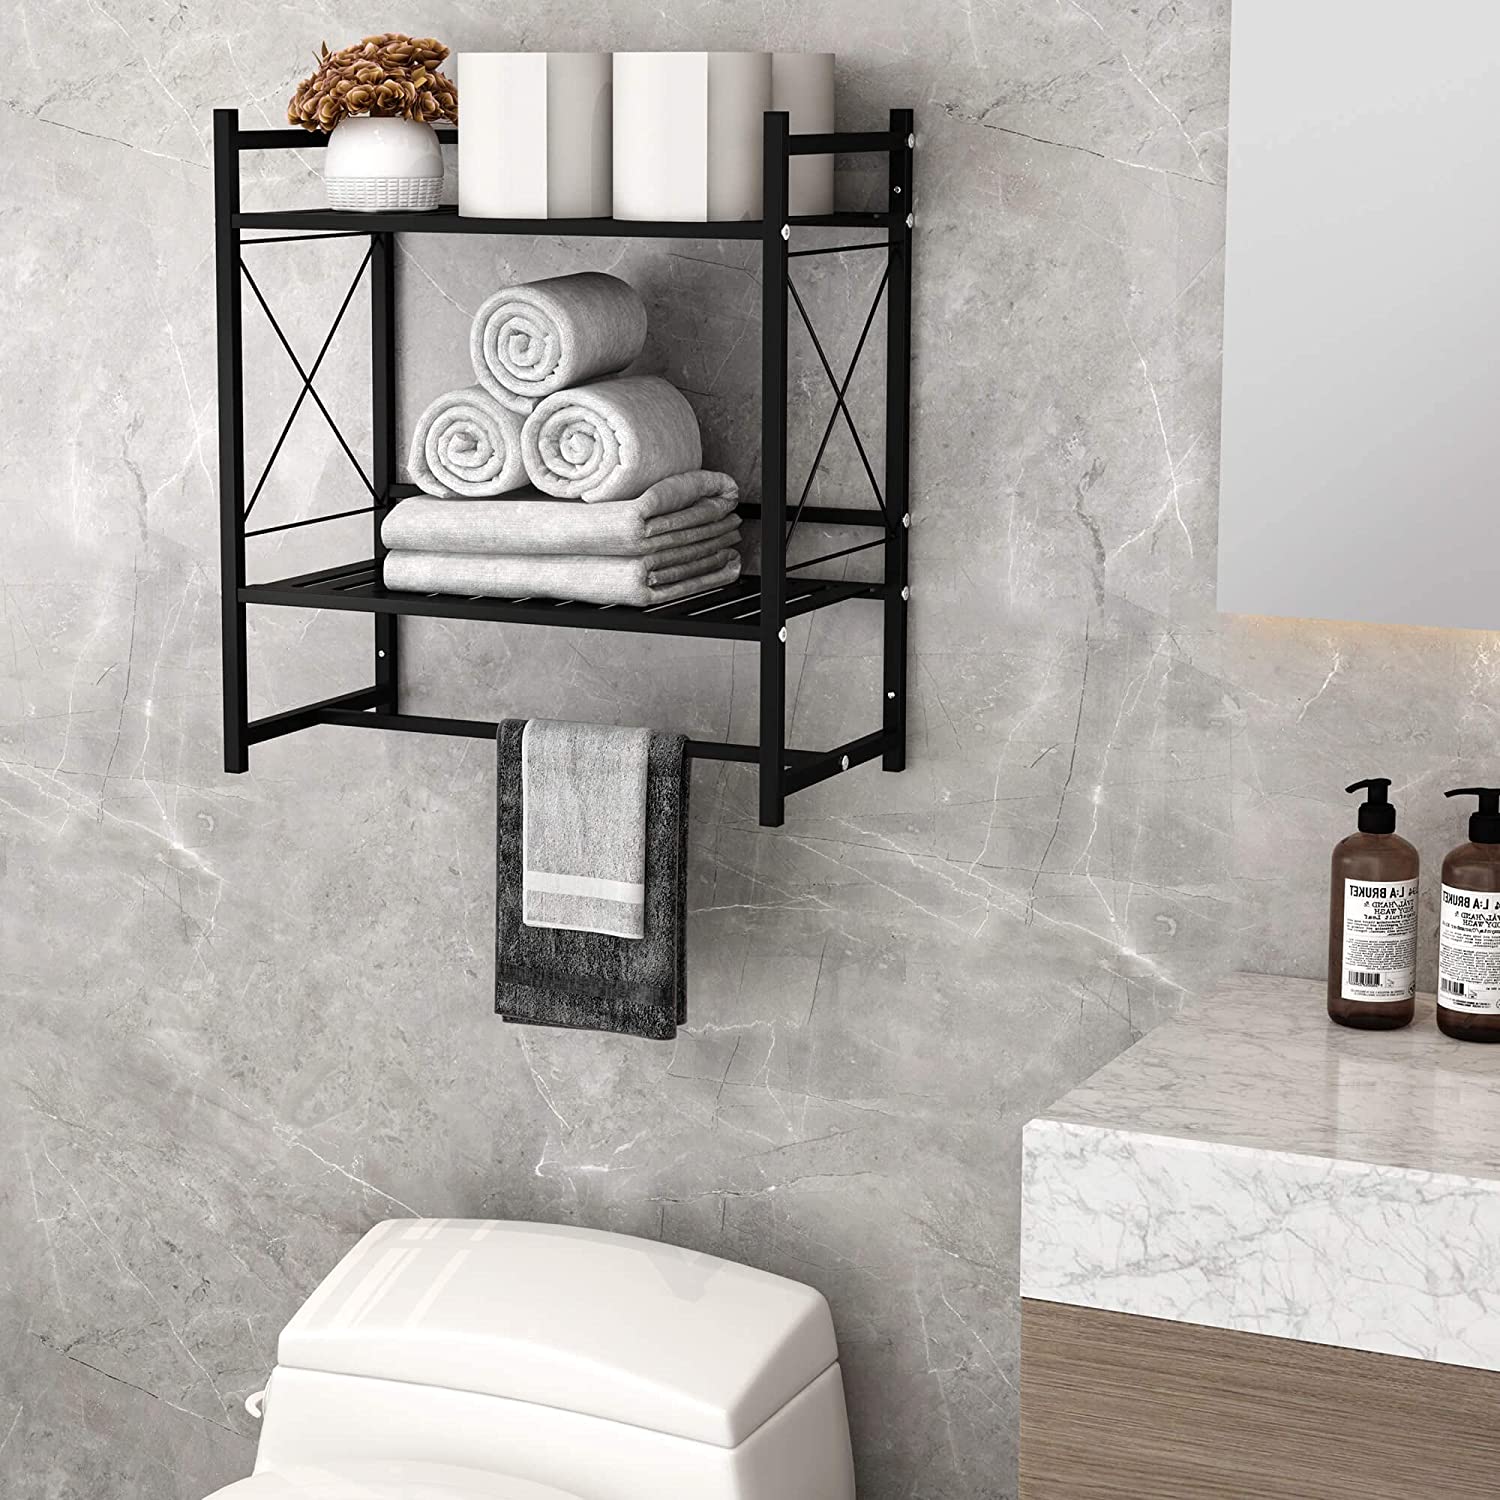 a typical bathroom storage solution using open shelving to store and display multiple items 